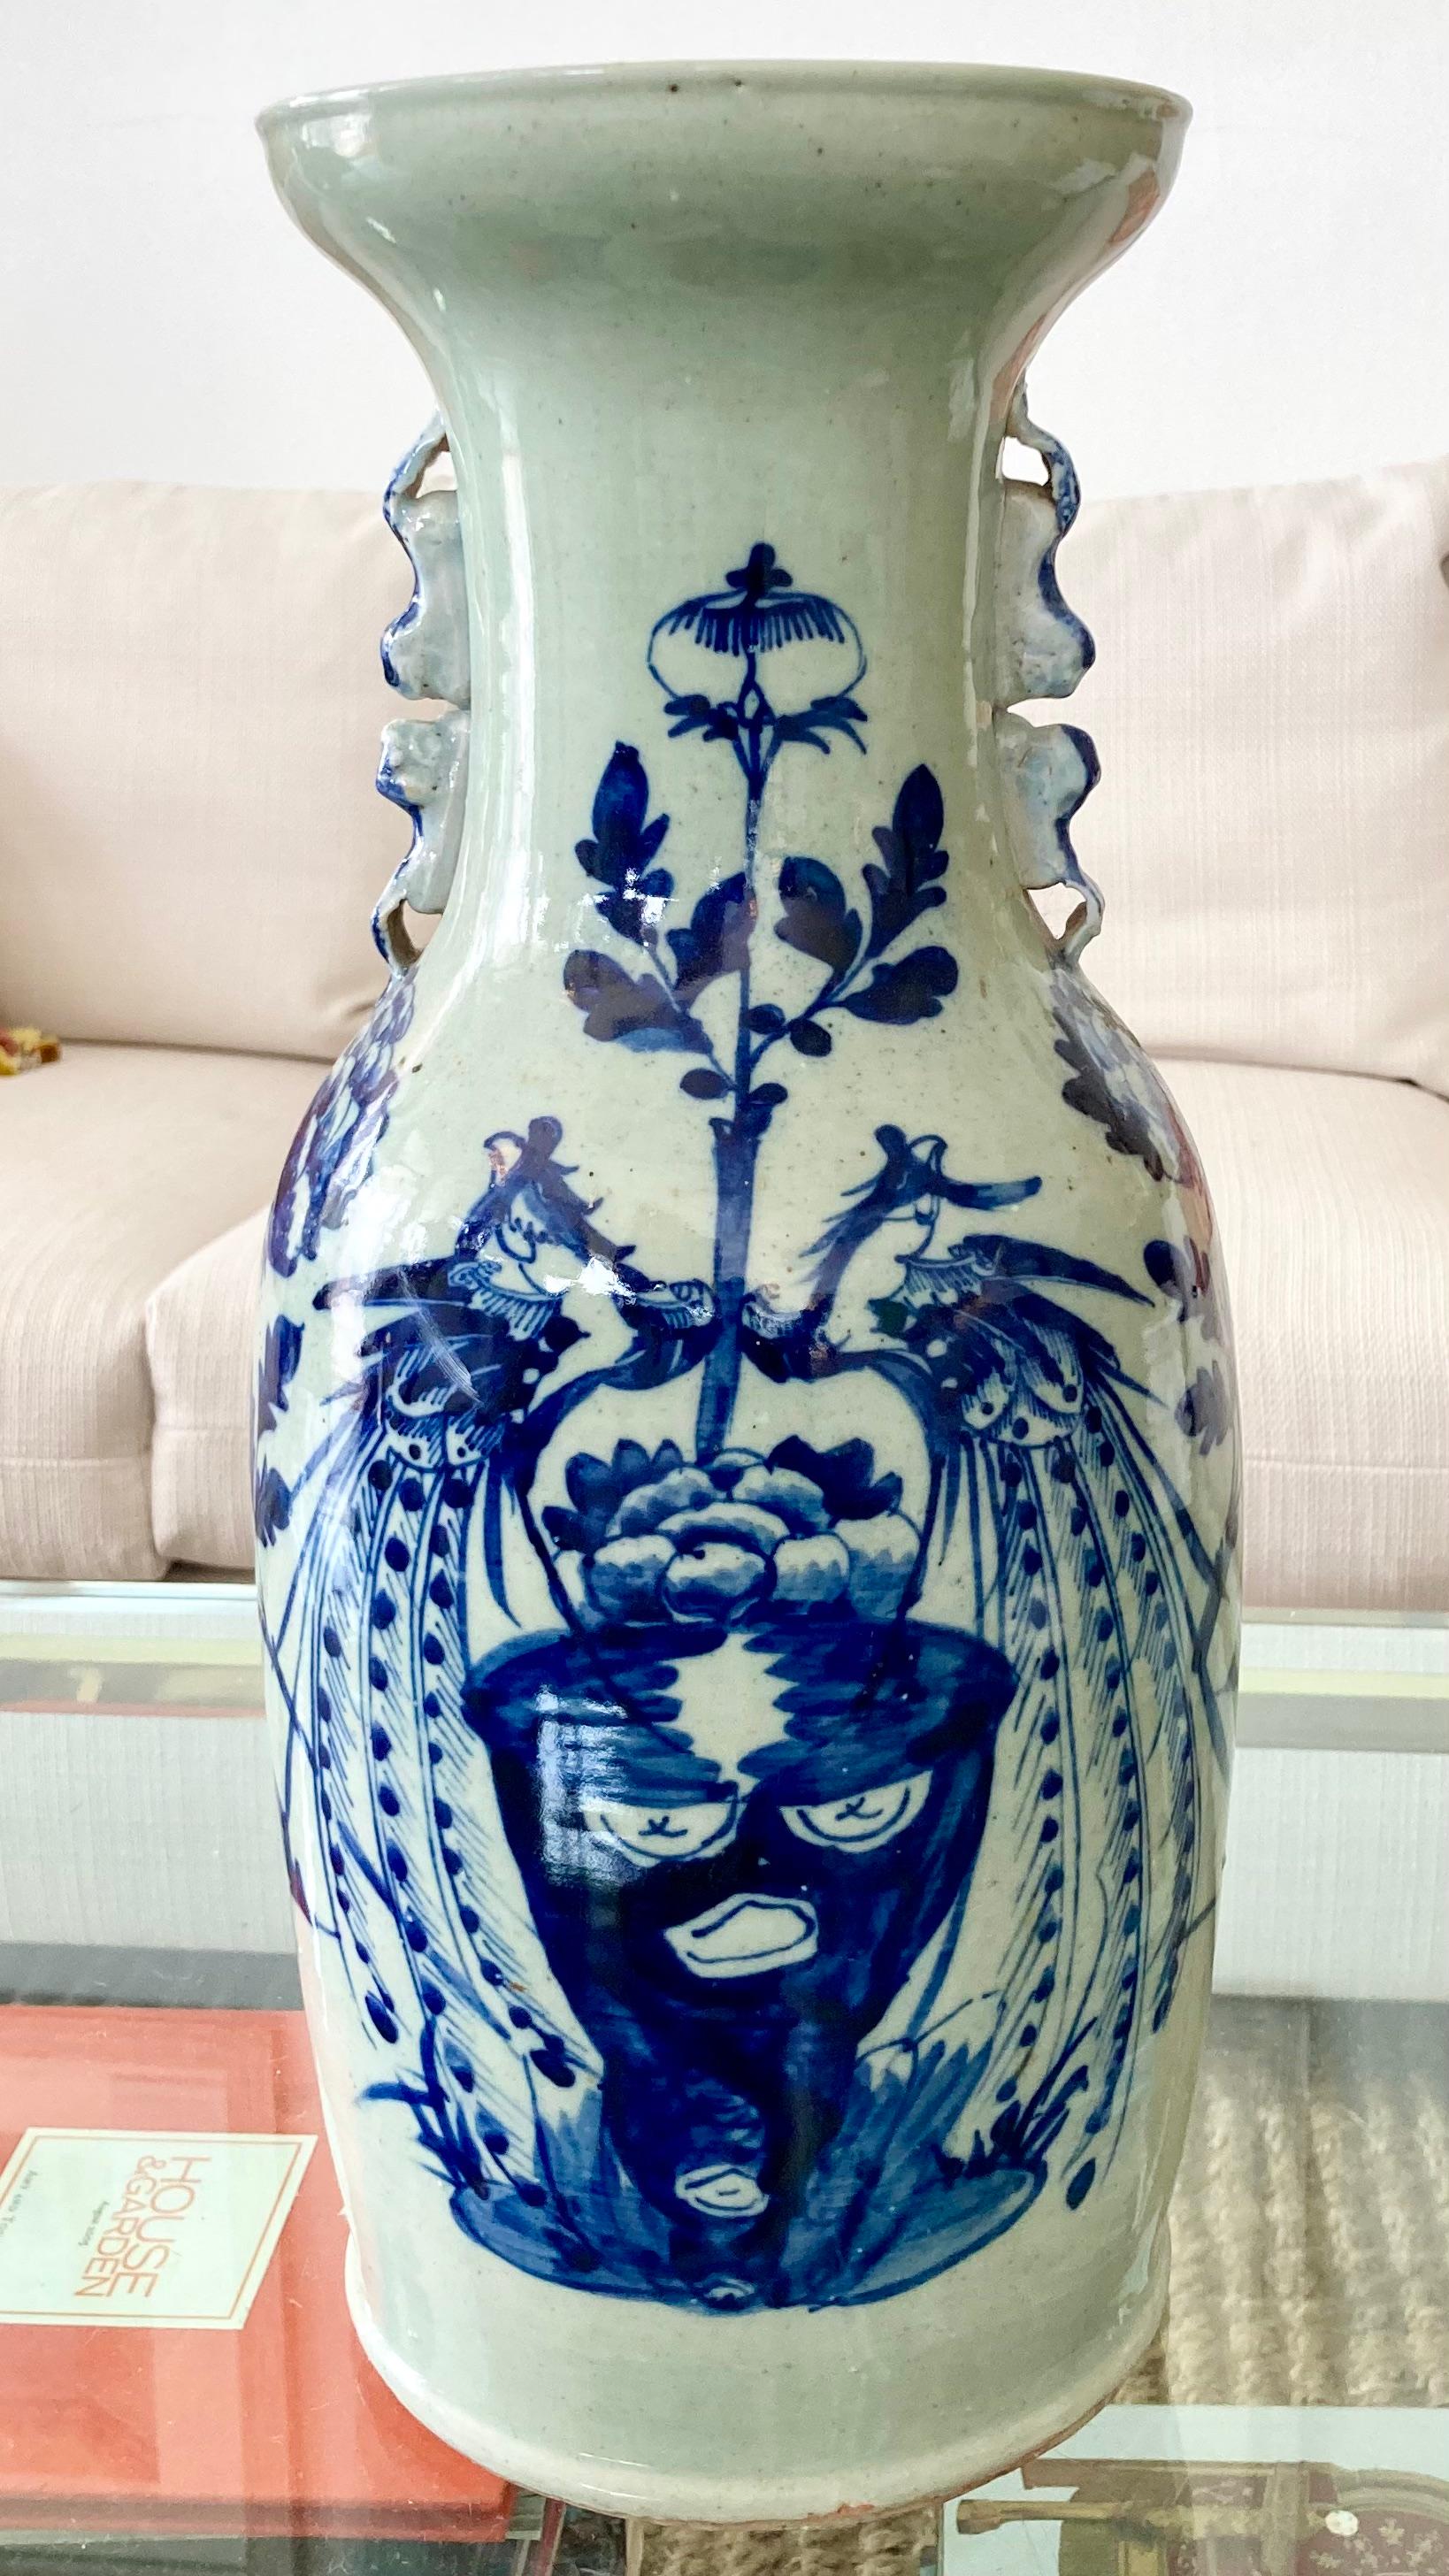 Beautiful Asian blue and white ( celadon green tint) ceramic vase. Great addition to your interiors and table tops. No stamp at base. Very stylish form , pattern , and color combinations.